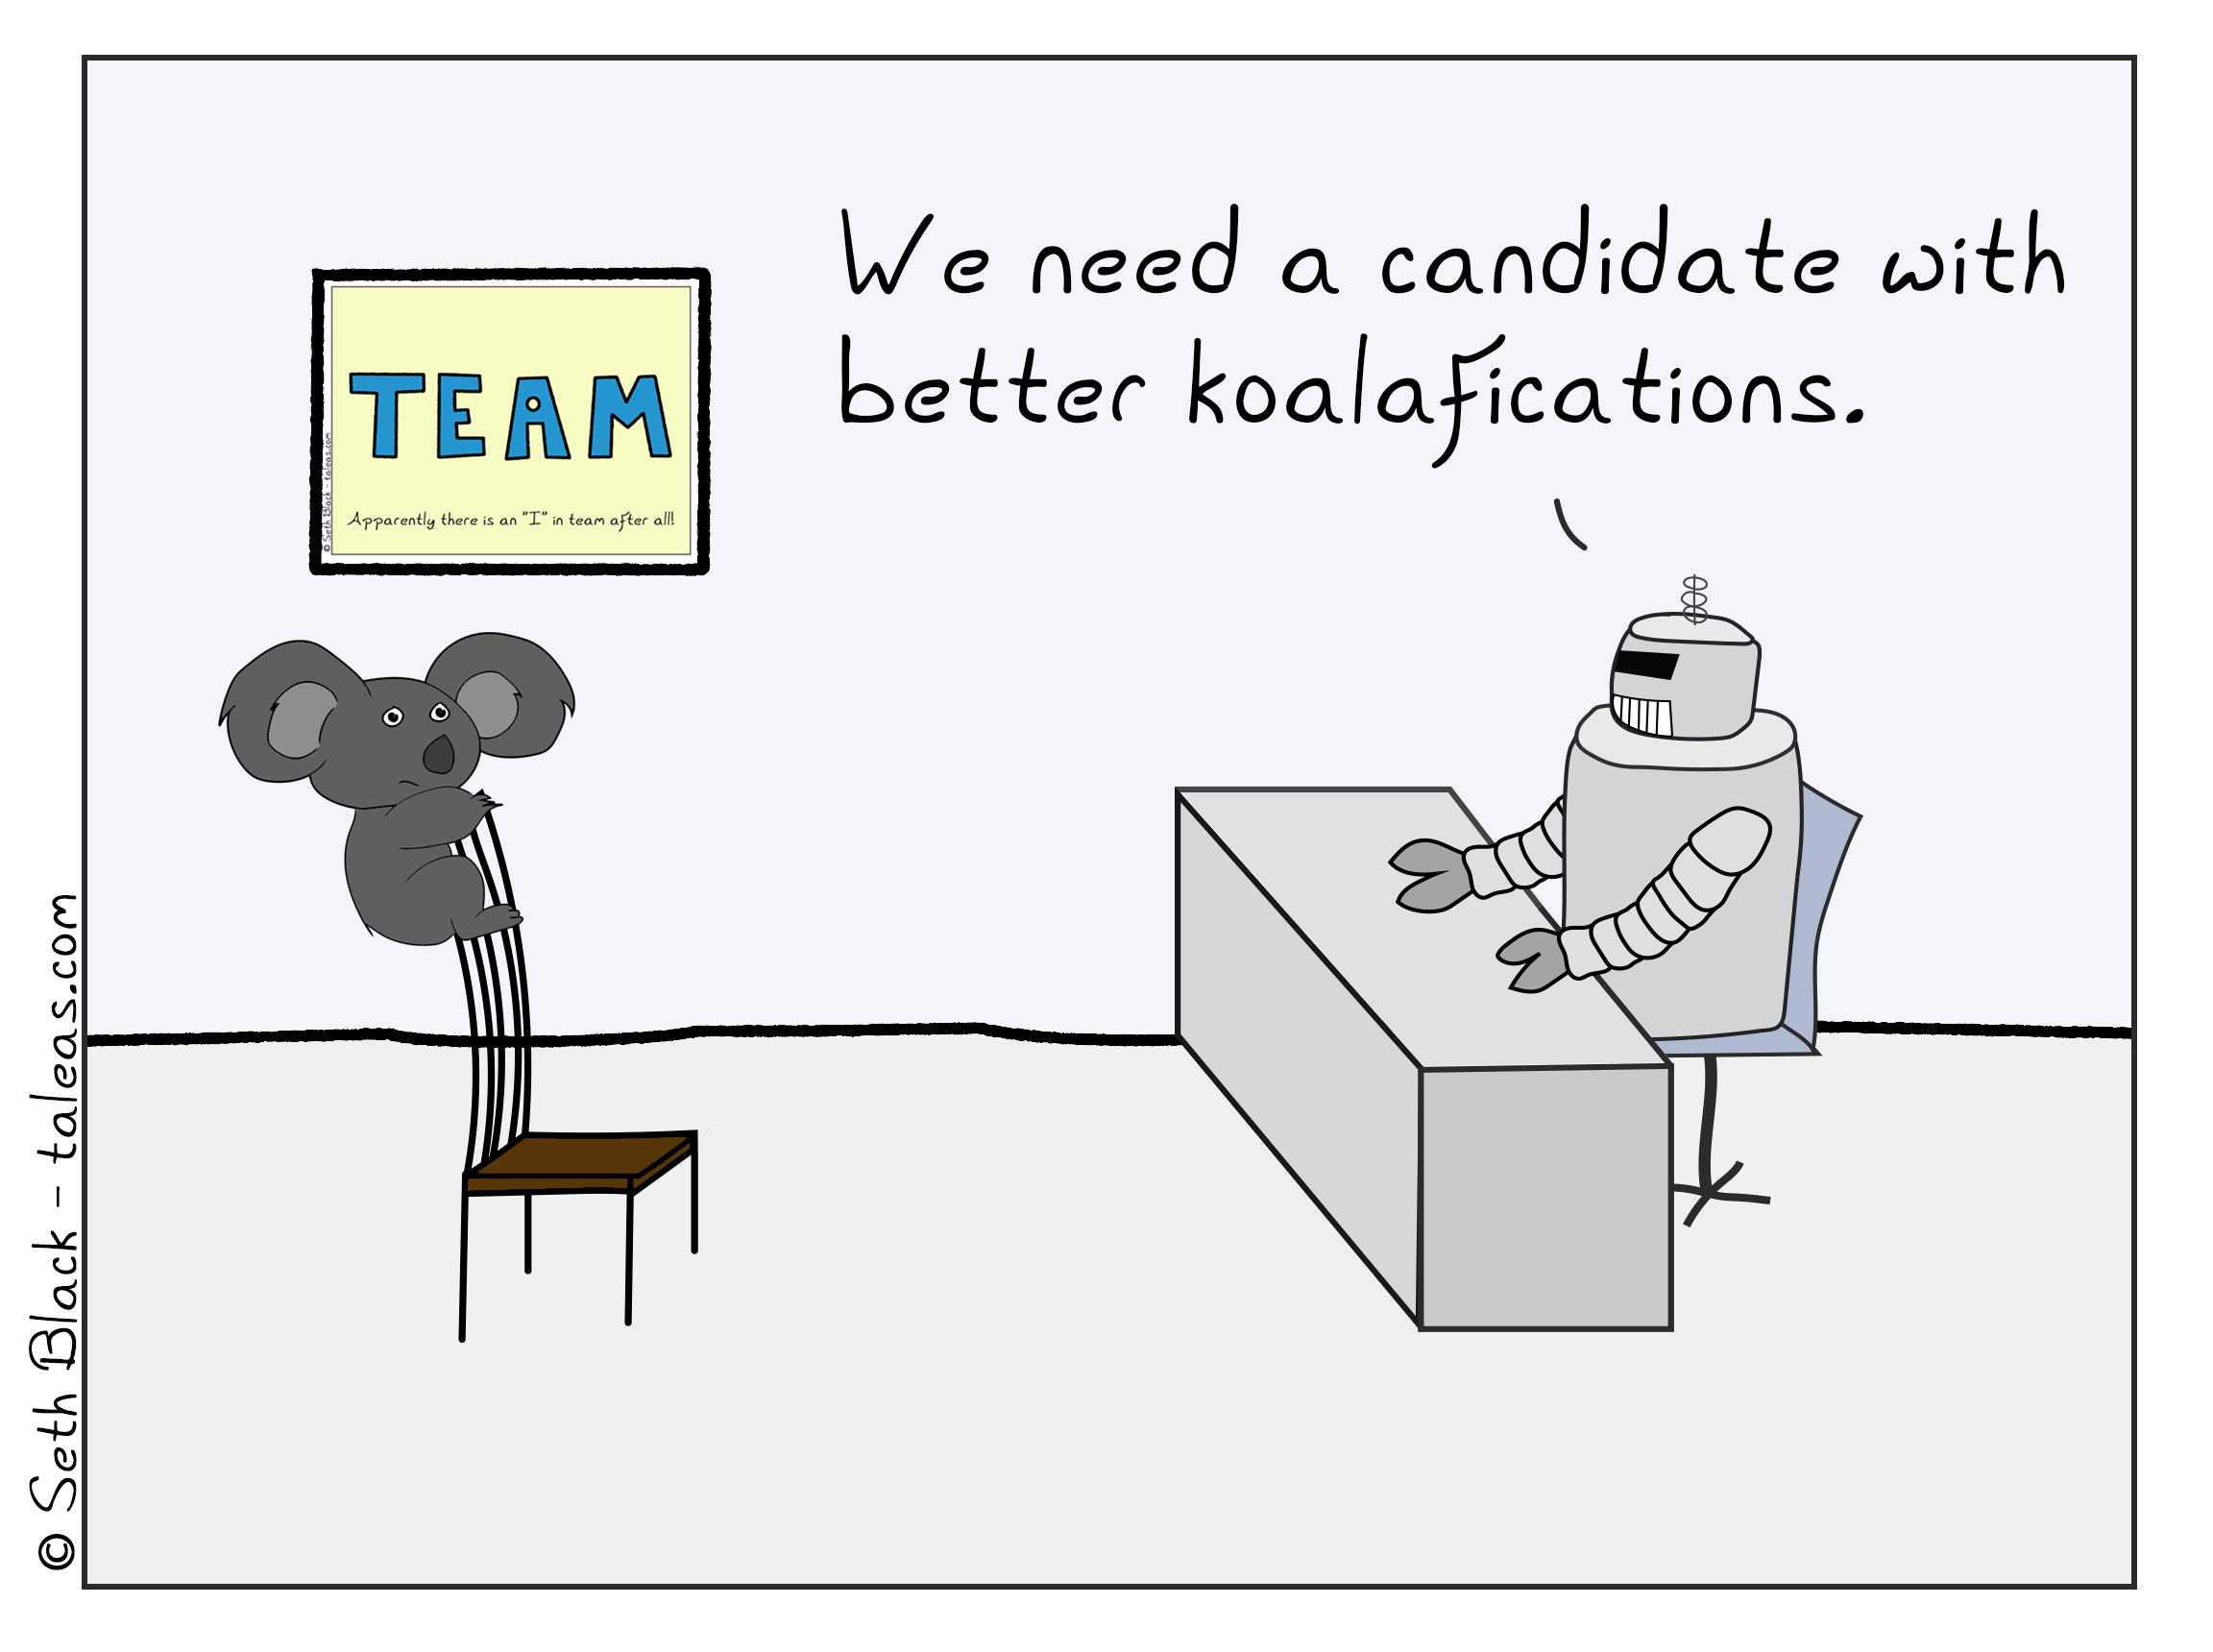 The robot supervisor is interviewing a koala. The koala has climbed the back of the interviewing chair. Robot supervisor says, "We need a candidate with better koalafications."